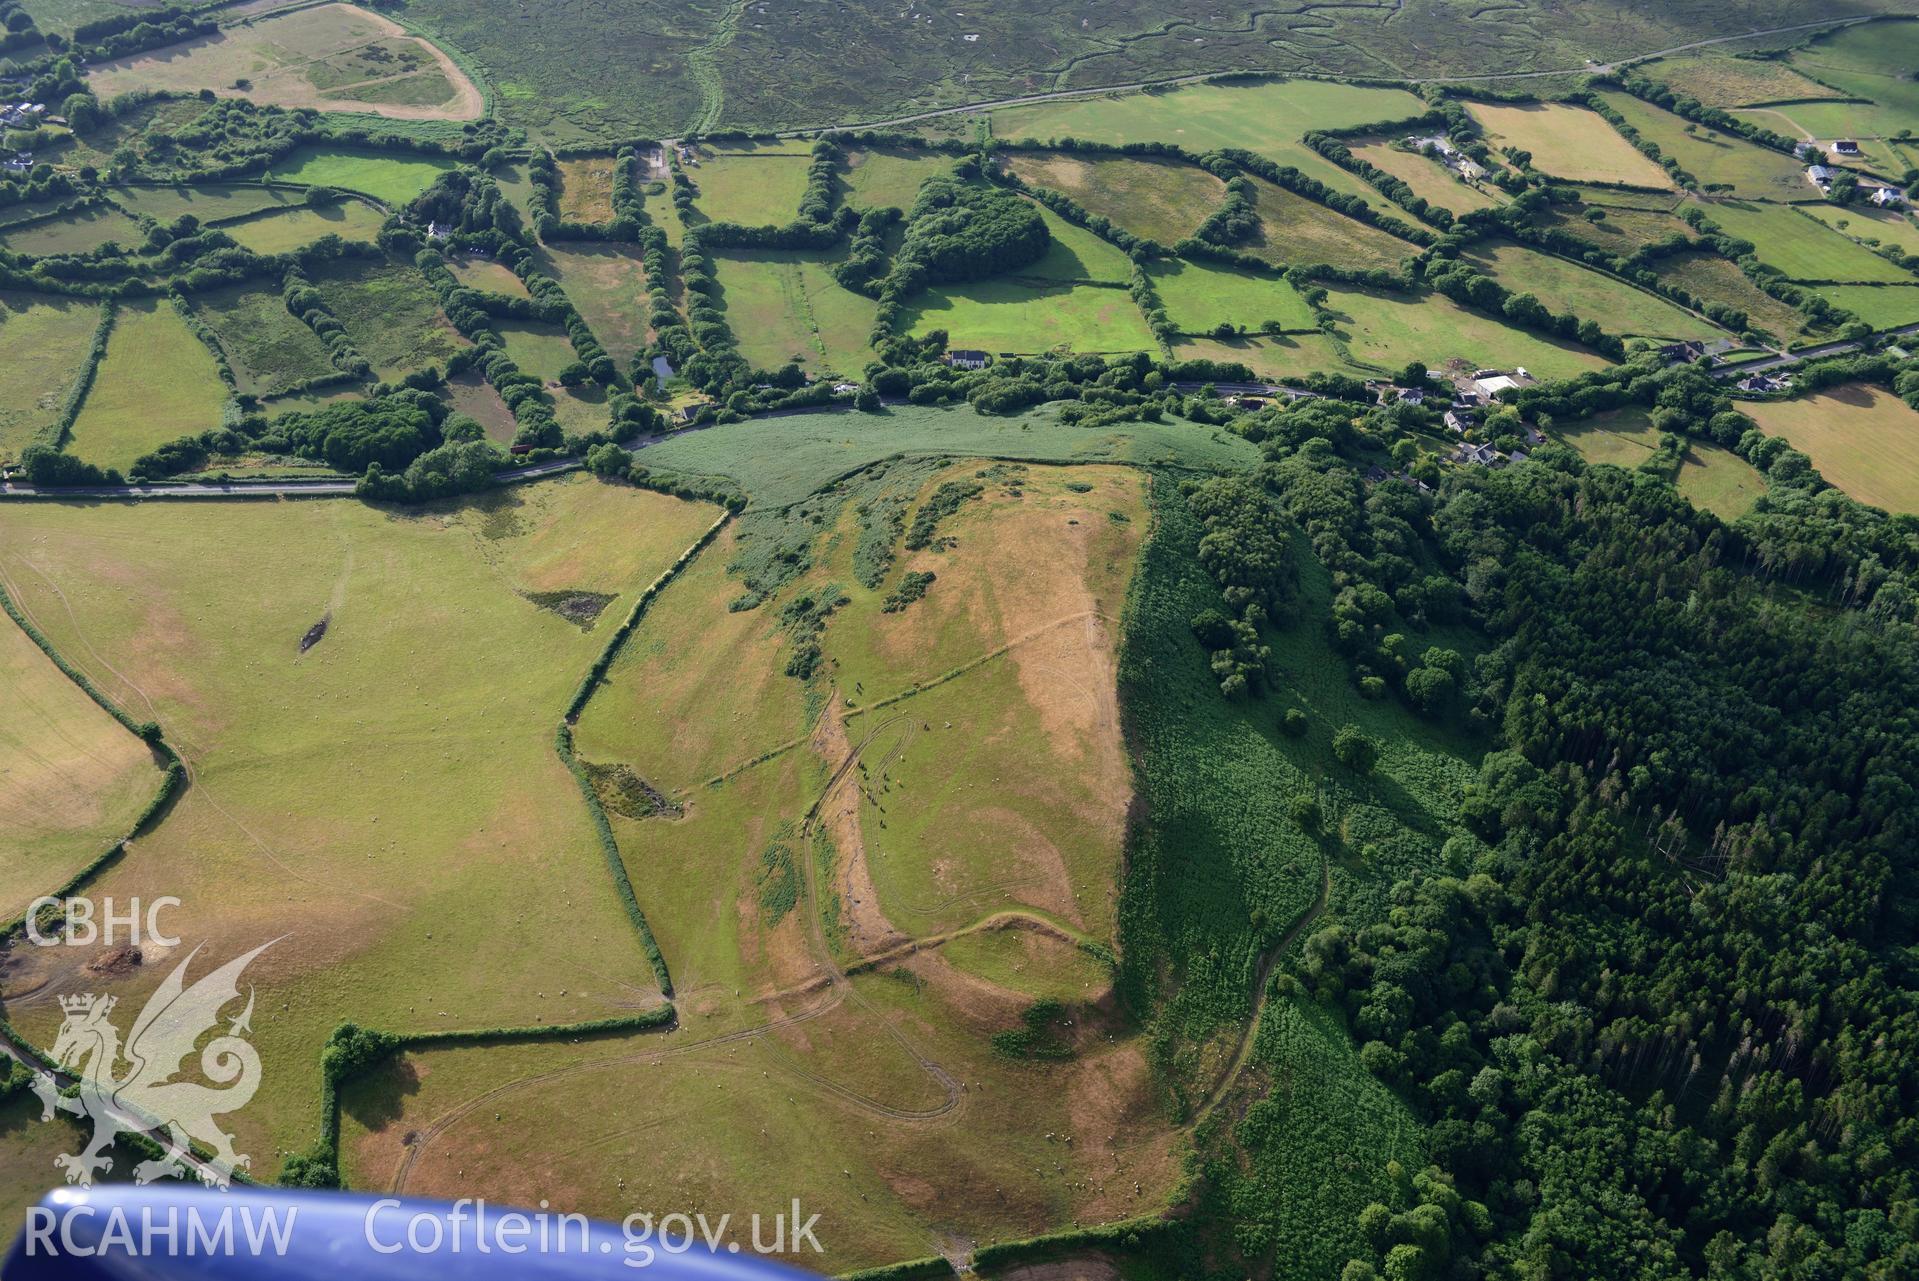 Royal Commission aerial photography of Cil Ifor top hillfort with extensive parching, and new archaeological detail, taken on 17th July 2018 during the 2018 drought.